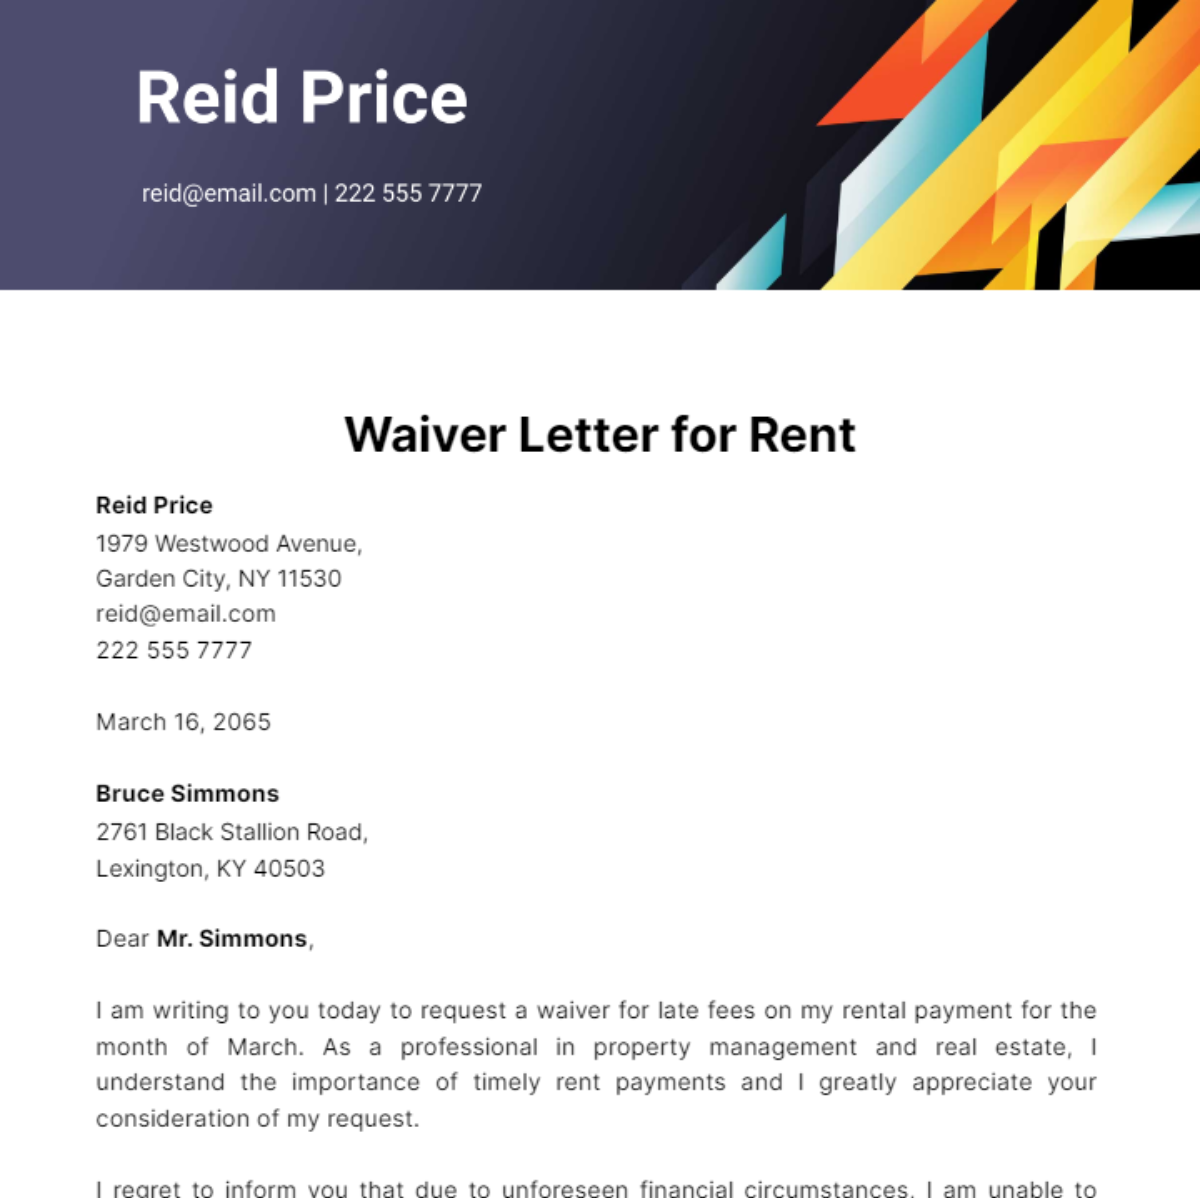 Waiver Letter for Rent Template